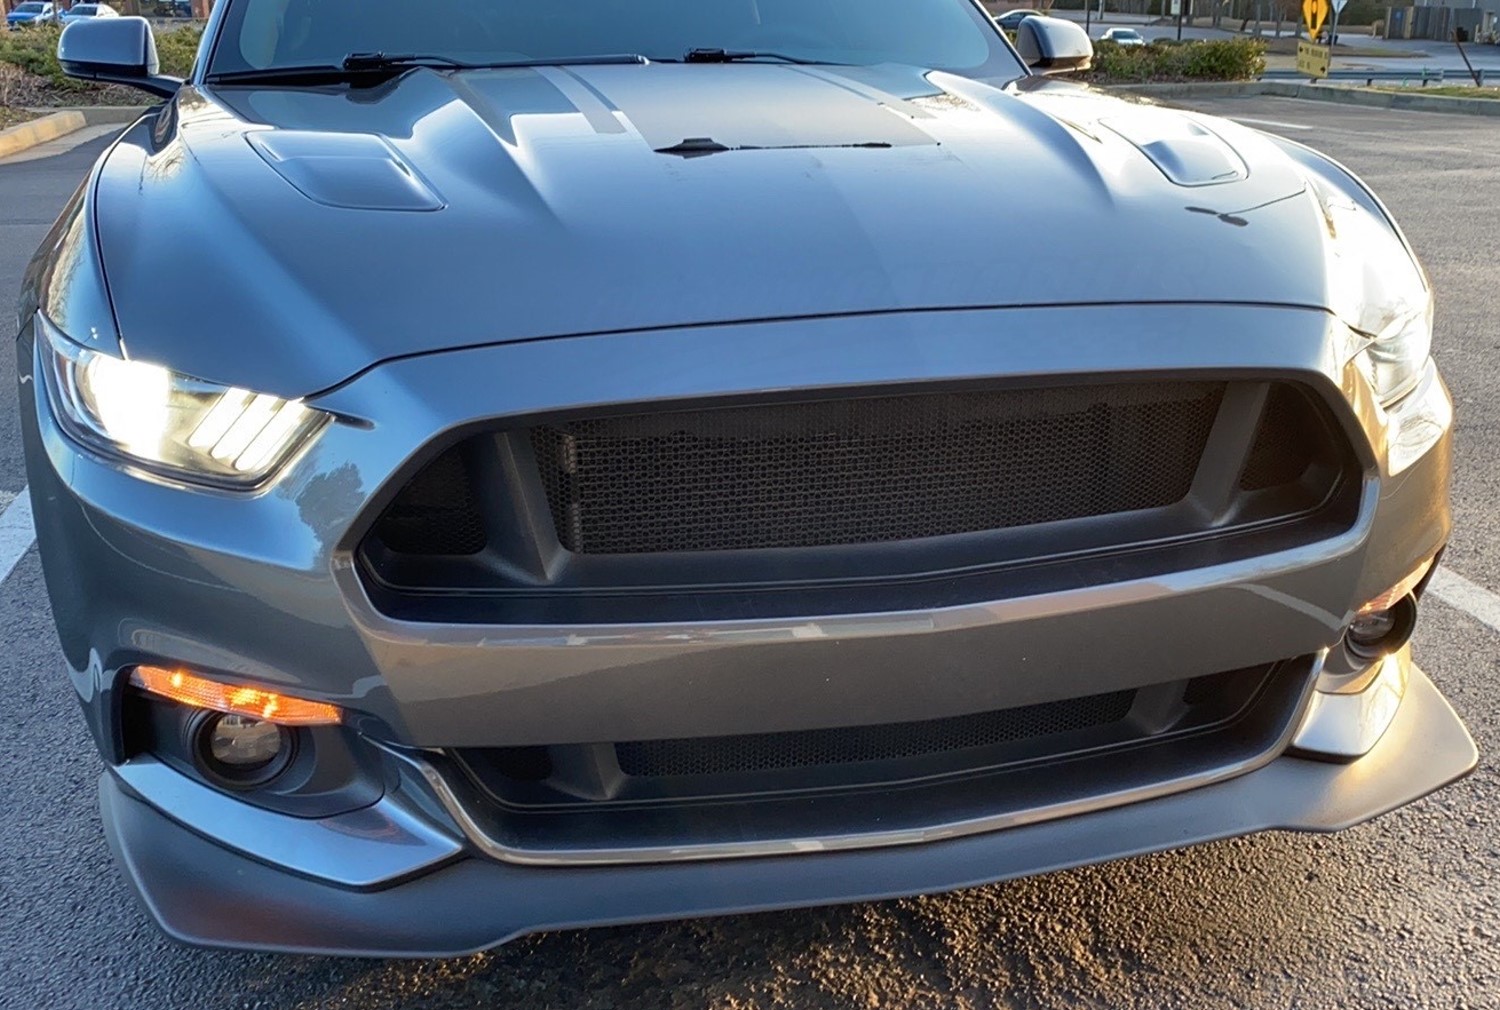 2015-17 Ford Mustang Customization: Hexagon Mesh Grille with No Logo